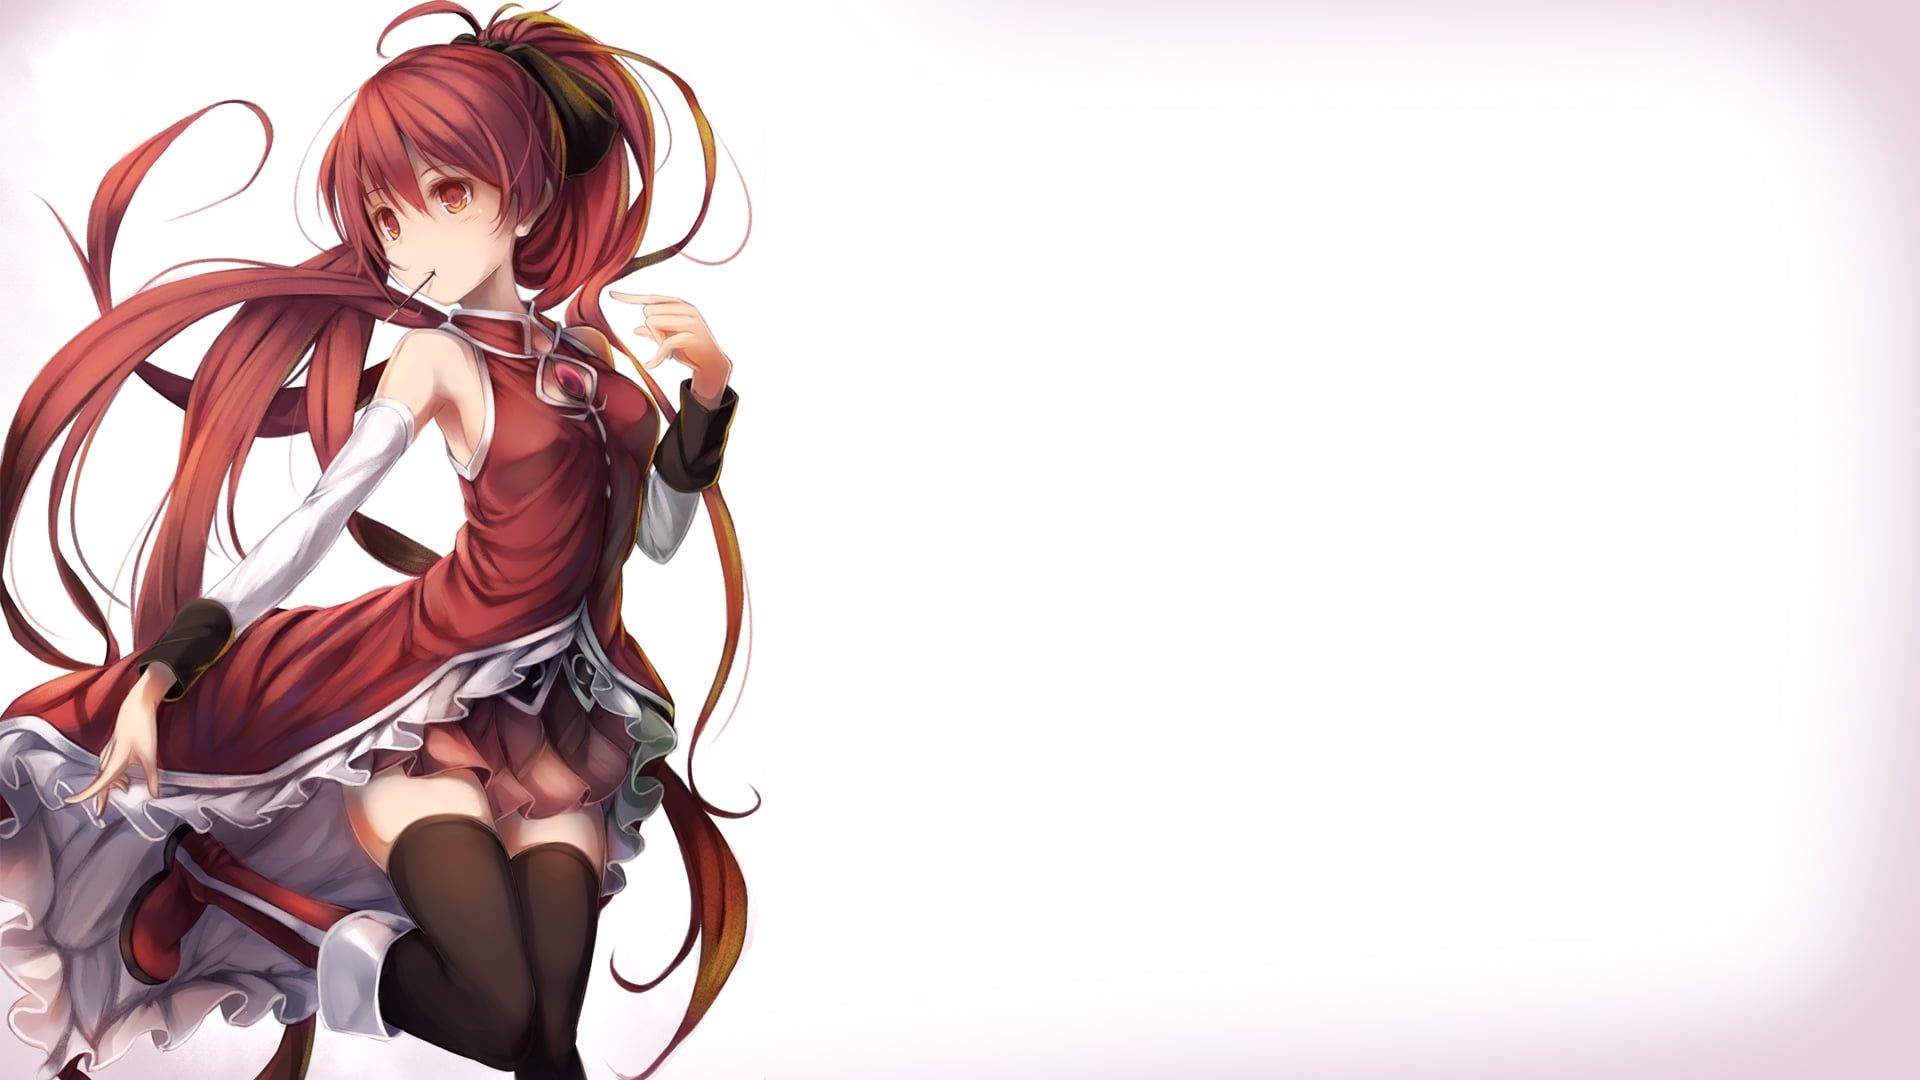 Illustration Of A Red Haired Anime Girl Character HD Wallpaper